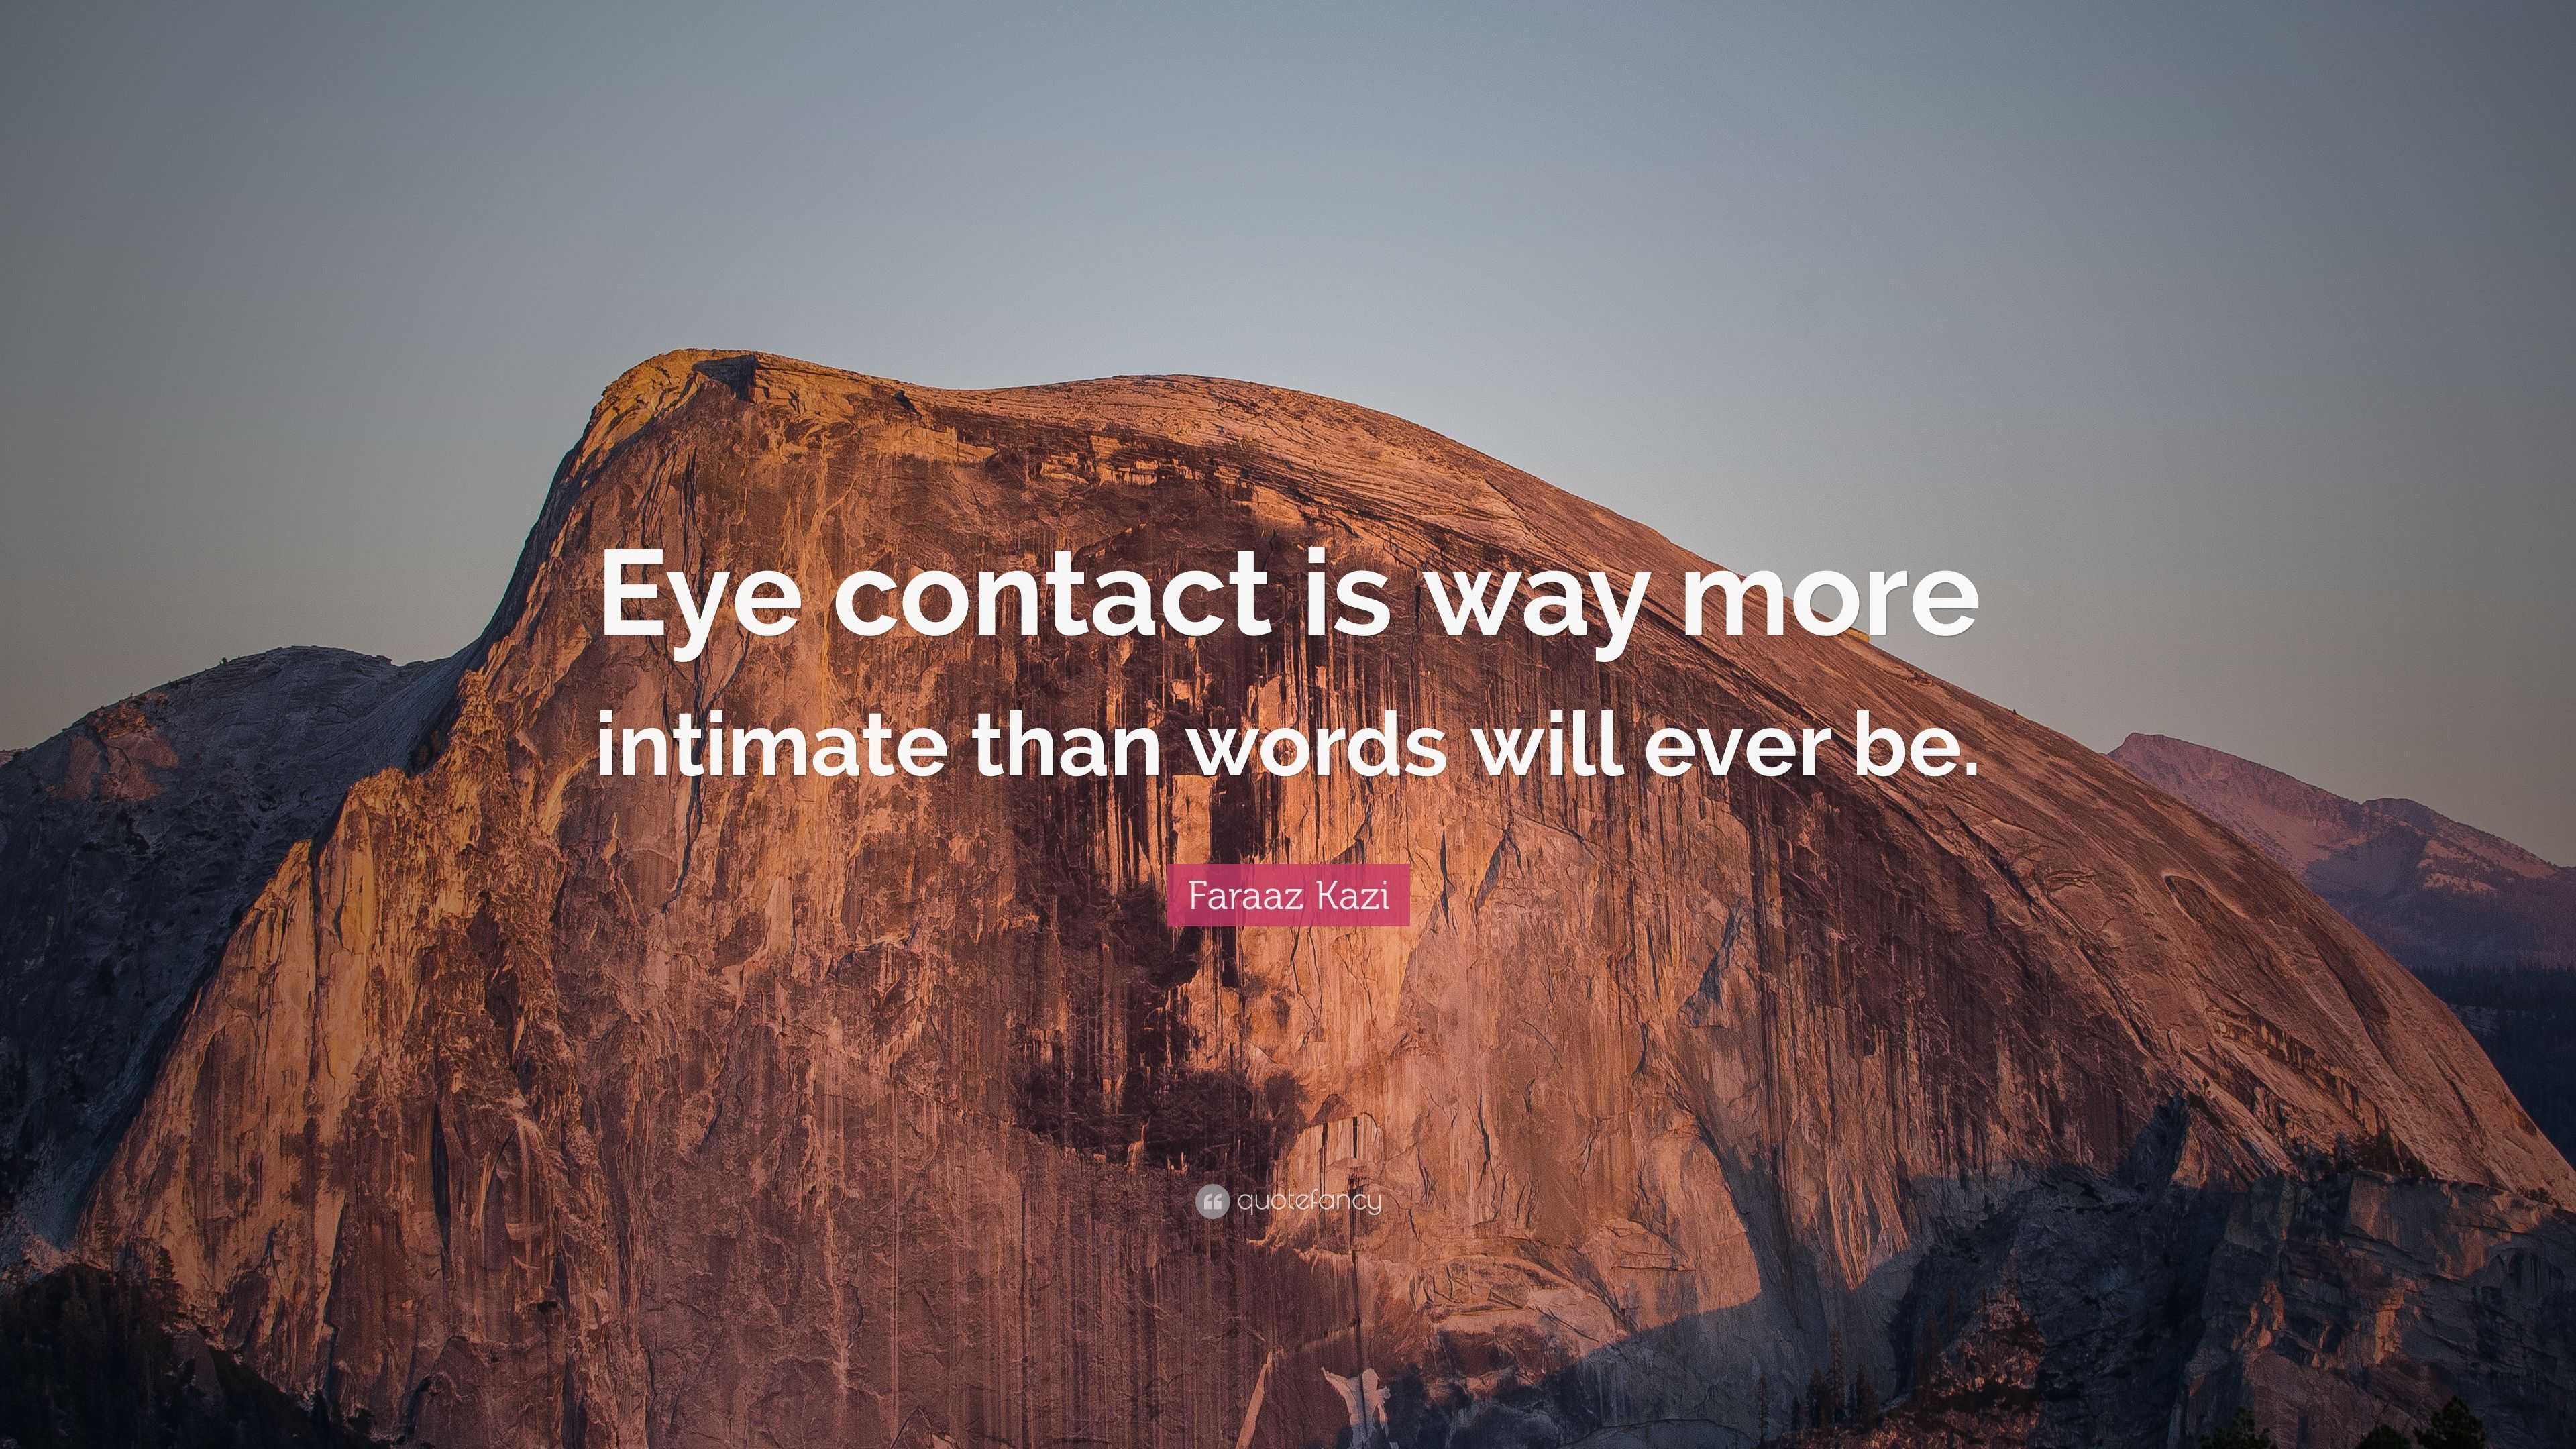 Faraaz Kazi Quote “eye Contact Is Way More Intimate Than Words Will Ever Be ”